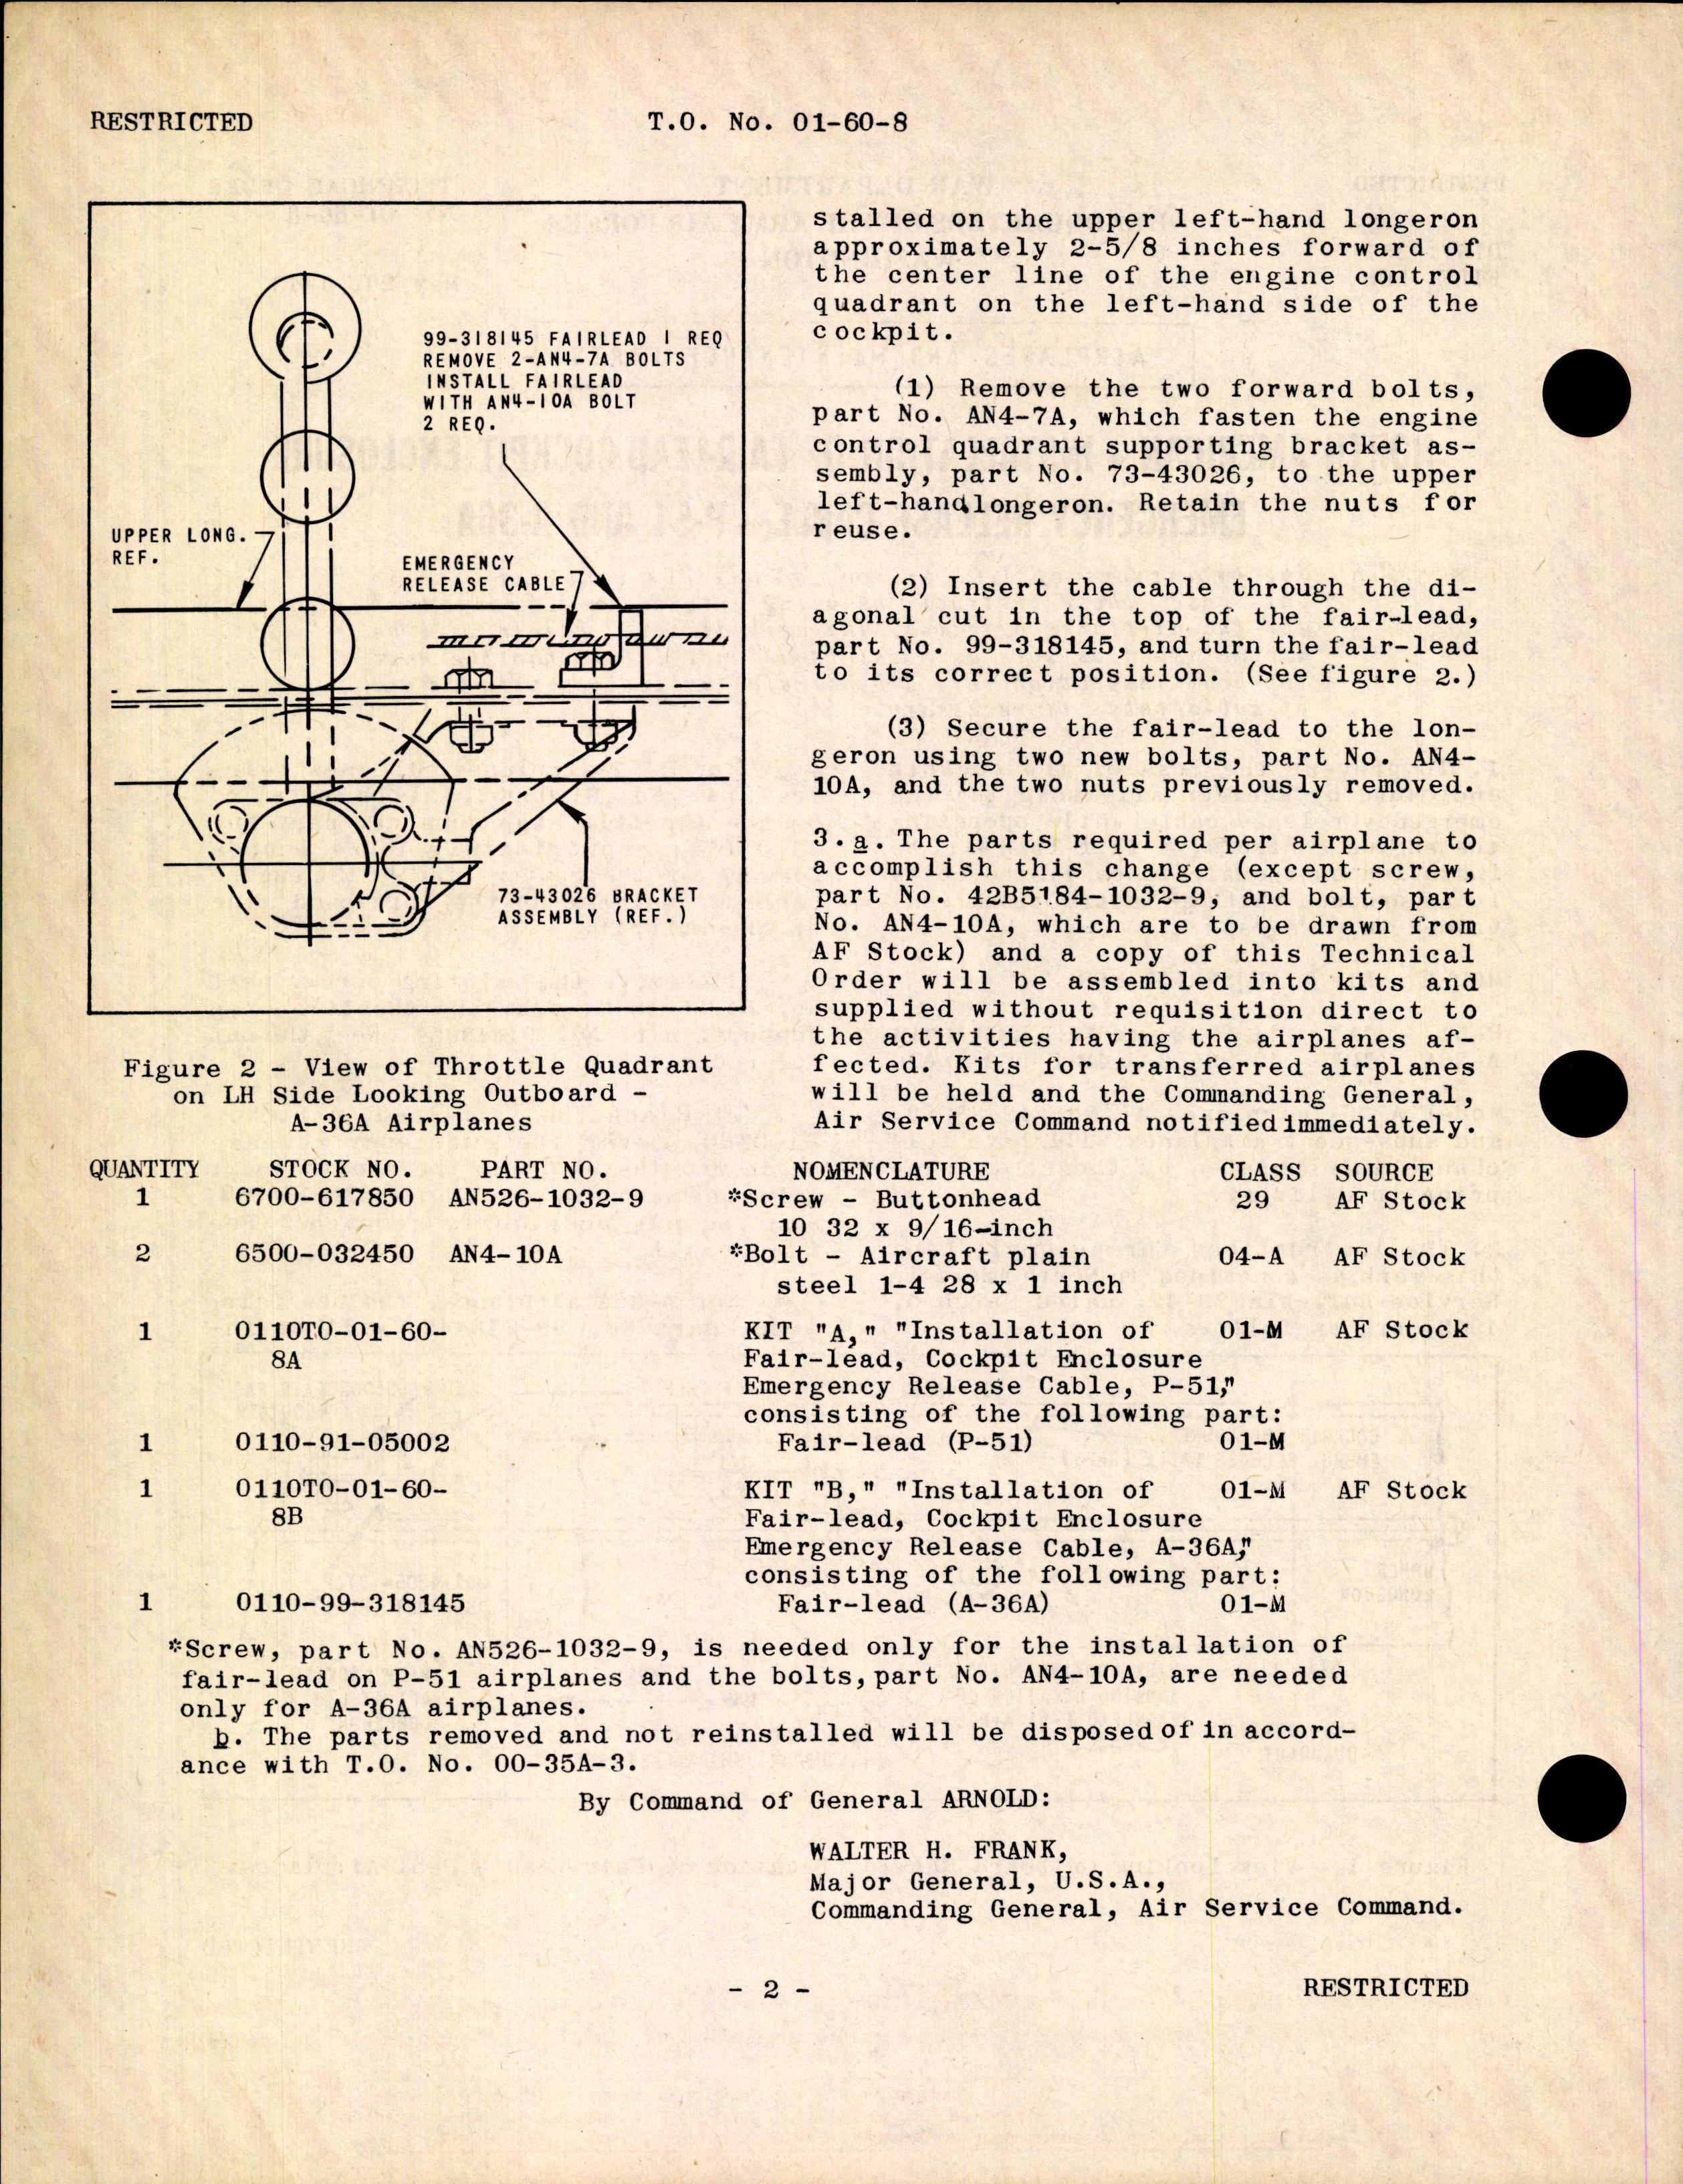 Sample page 2 from AirCorps Library document: Installation of Fair-Lead Cockpit Enclosure Emergency Release Cable for P-51 and A-36A